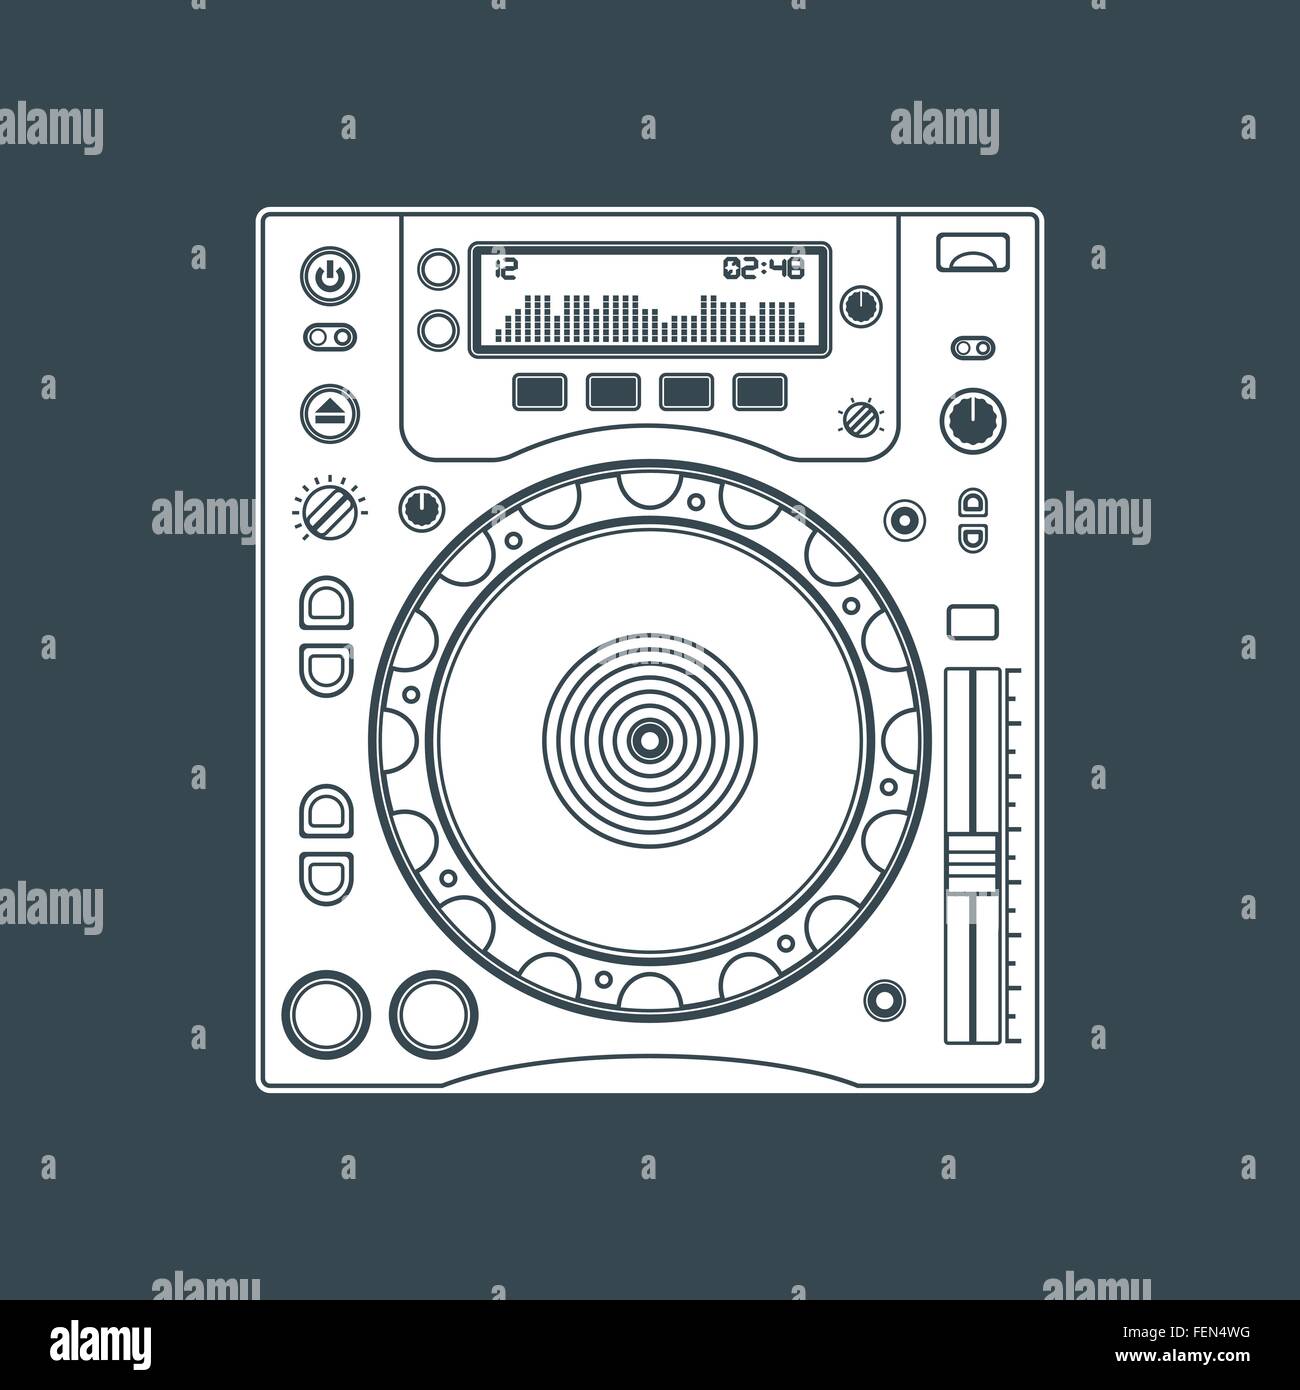 vector white solid color professional cd turntable dark background Stock Vector